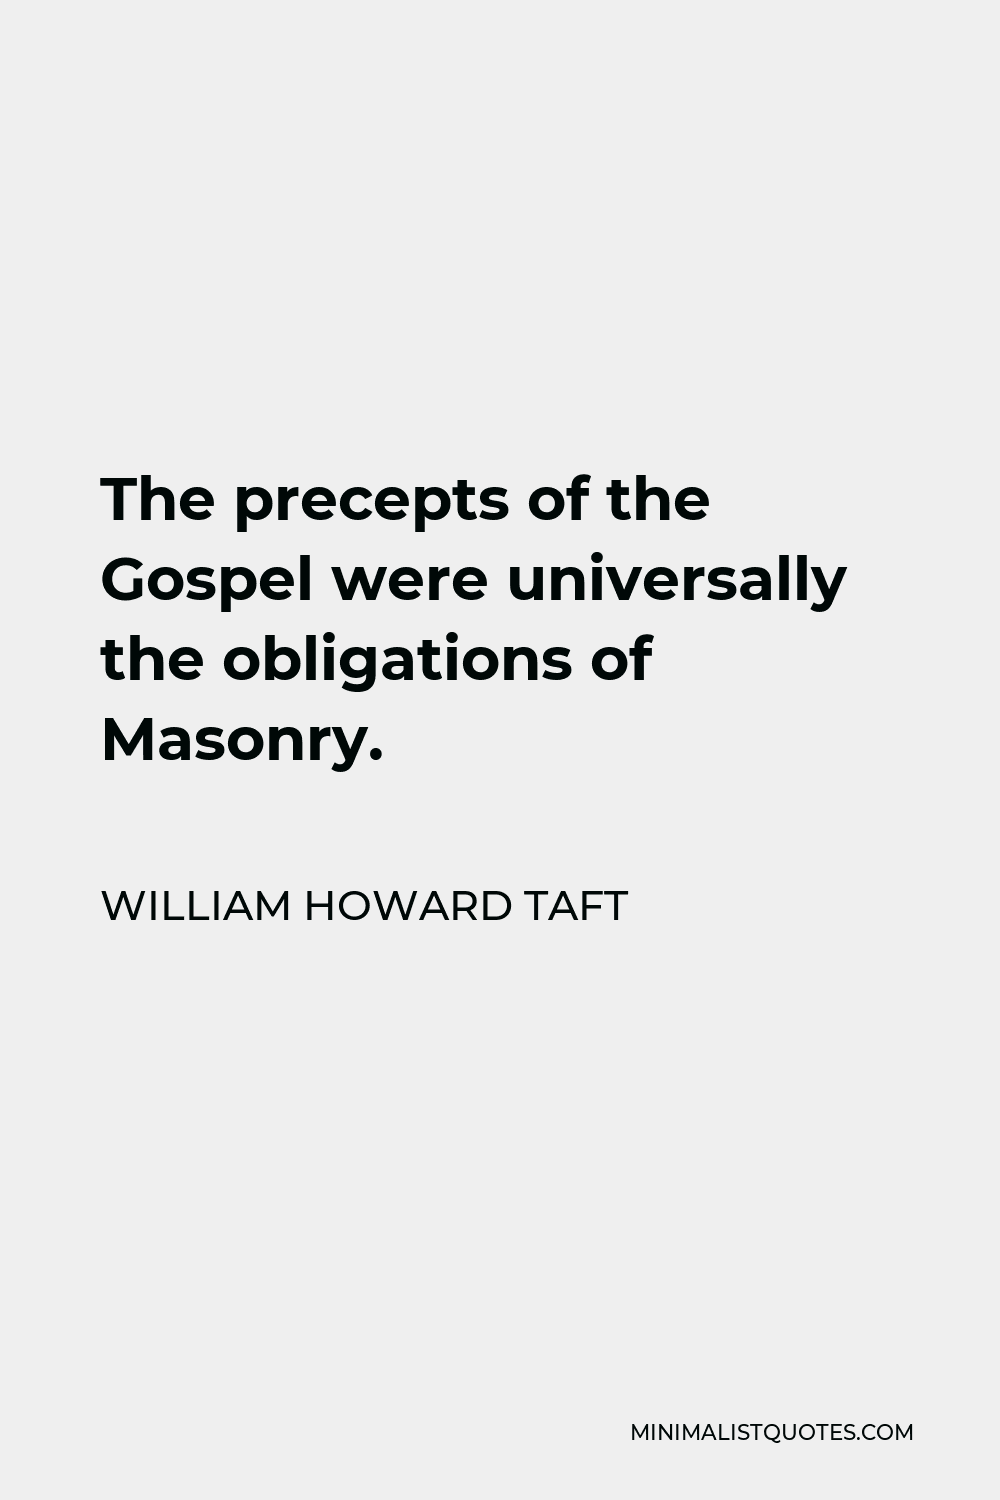 William Howard Taft Quote - The precepts of the Gospel were universally the obligations of Masonry.